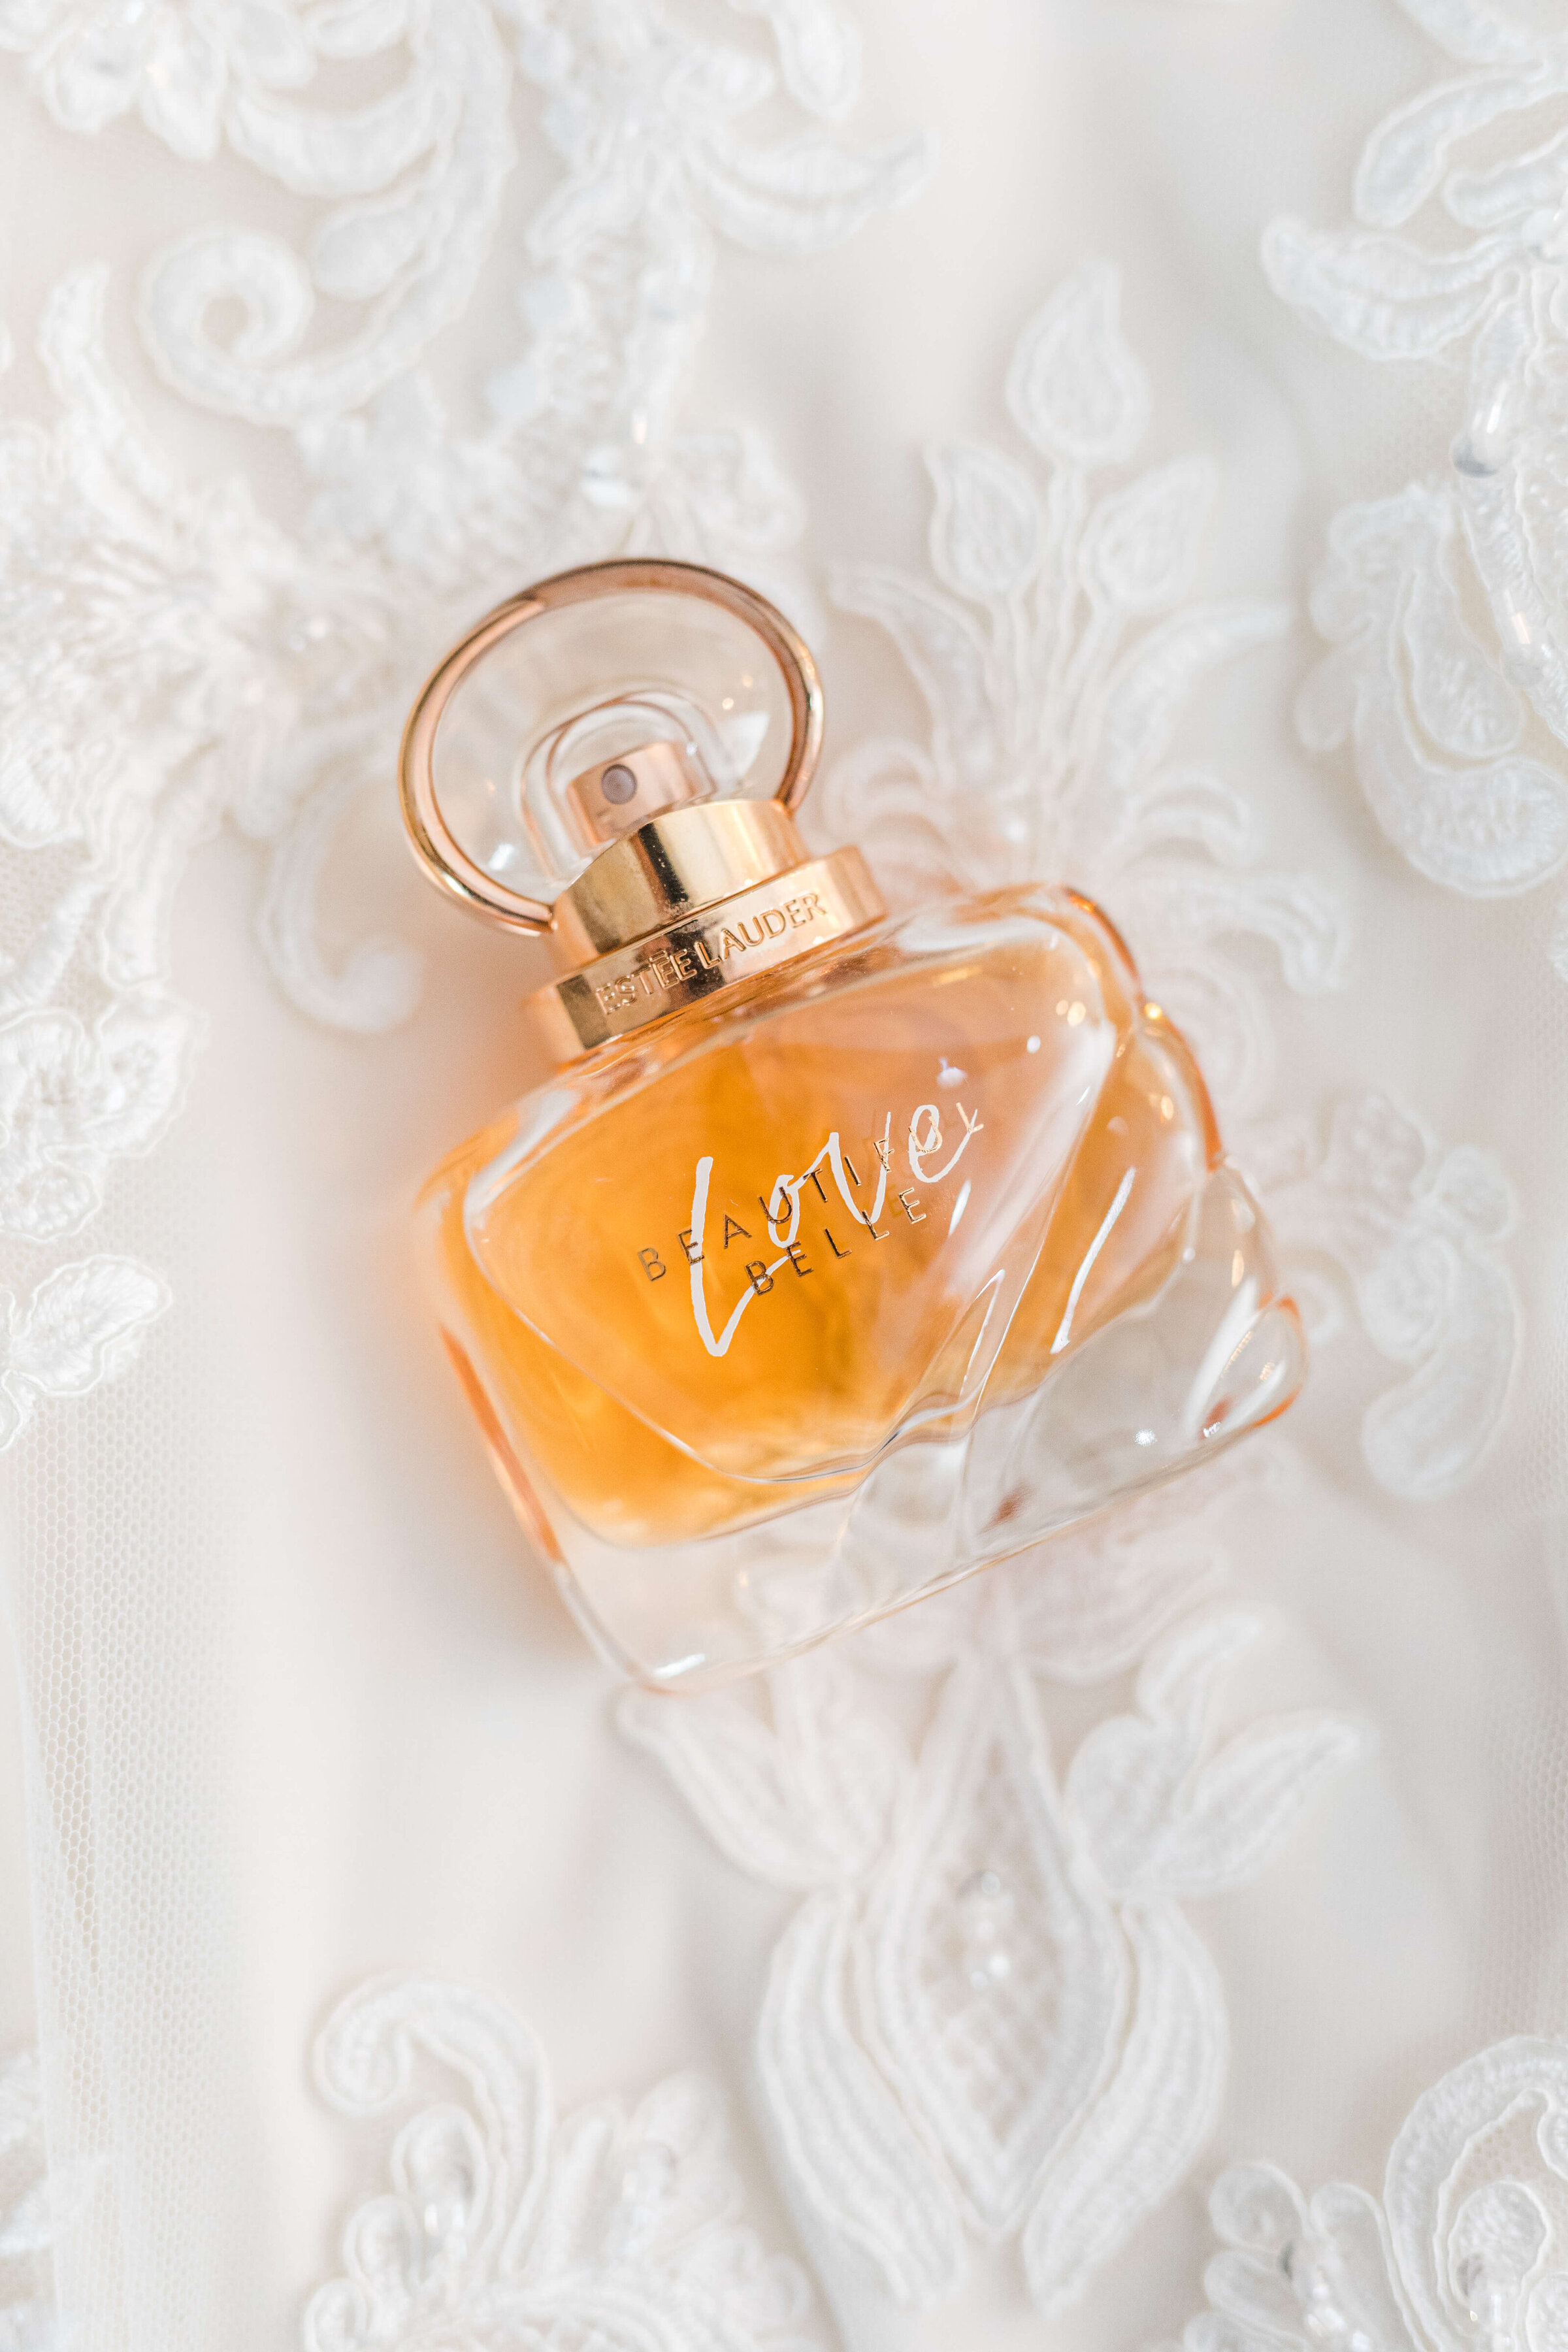 A photograph of Love perfume on top of a wedding dress